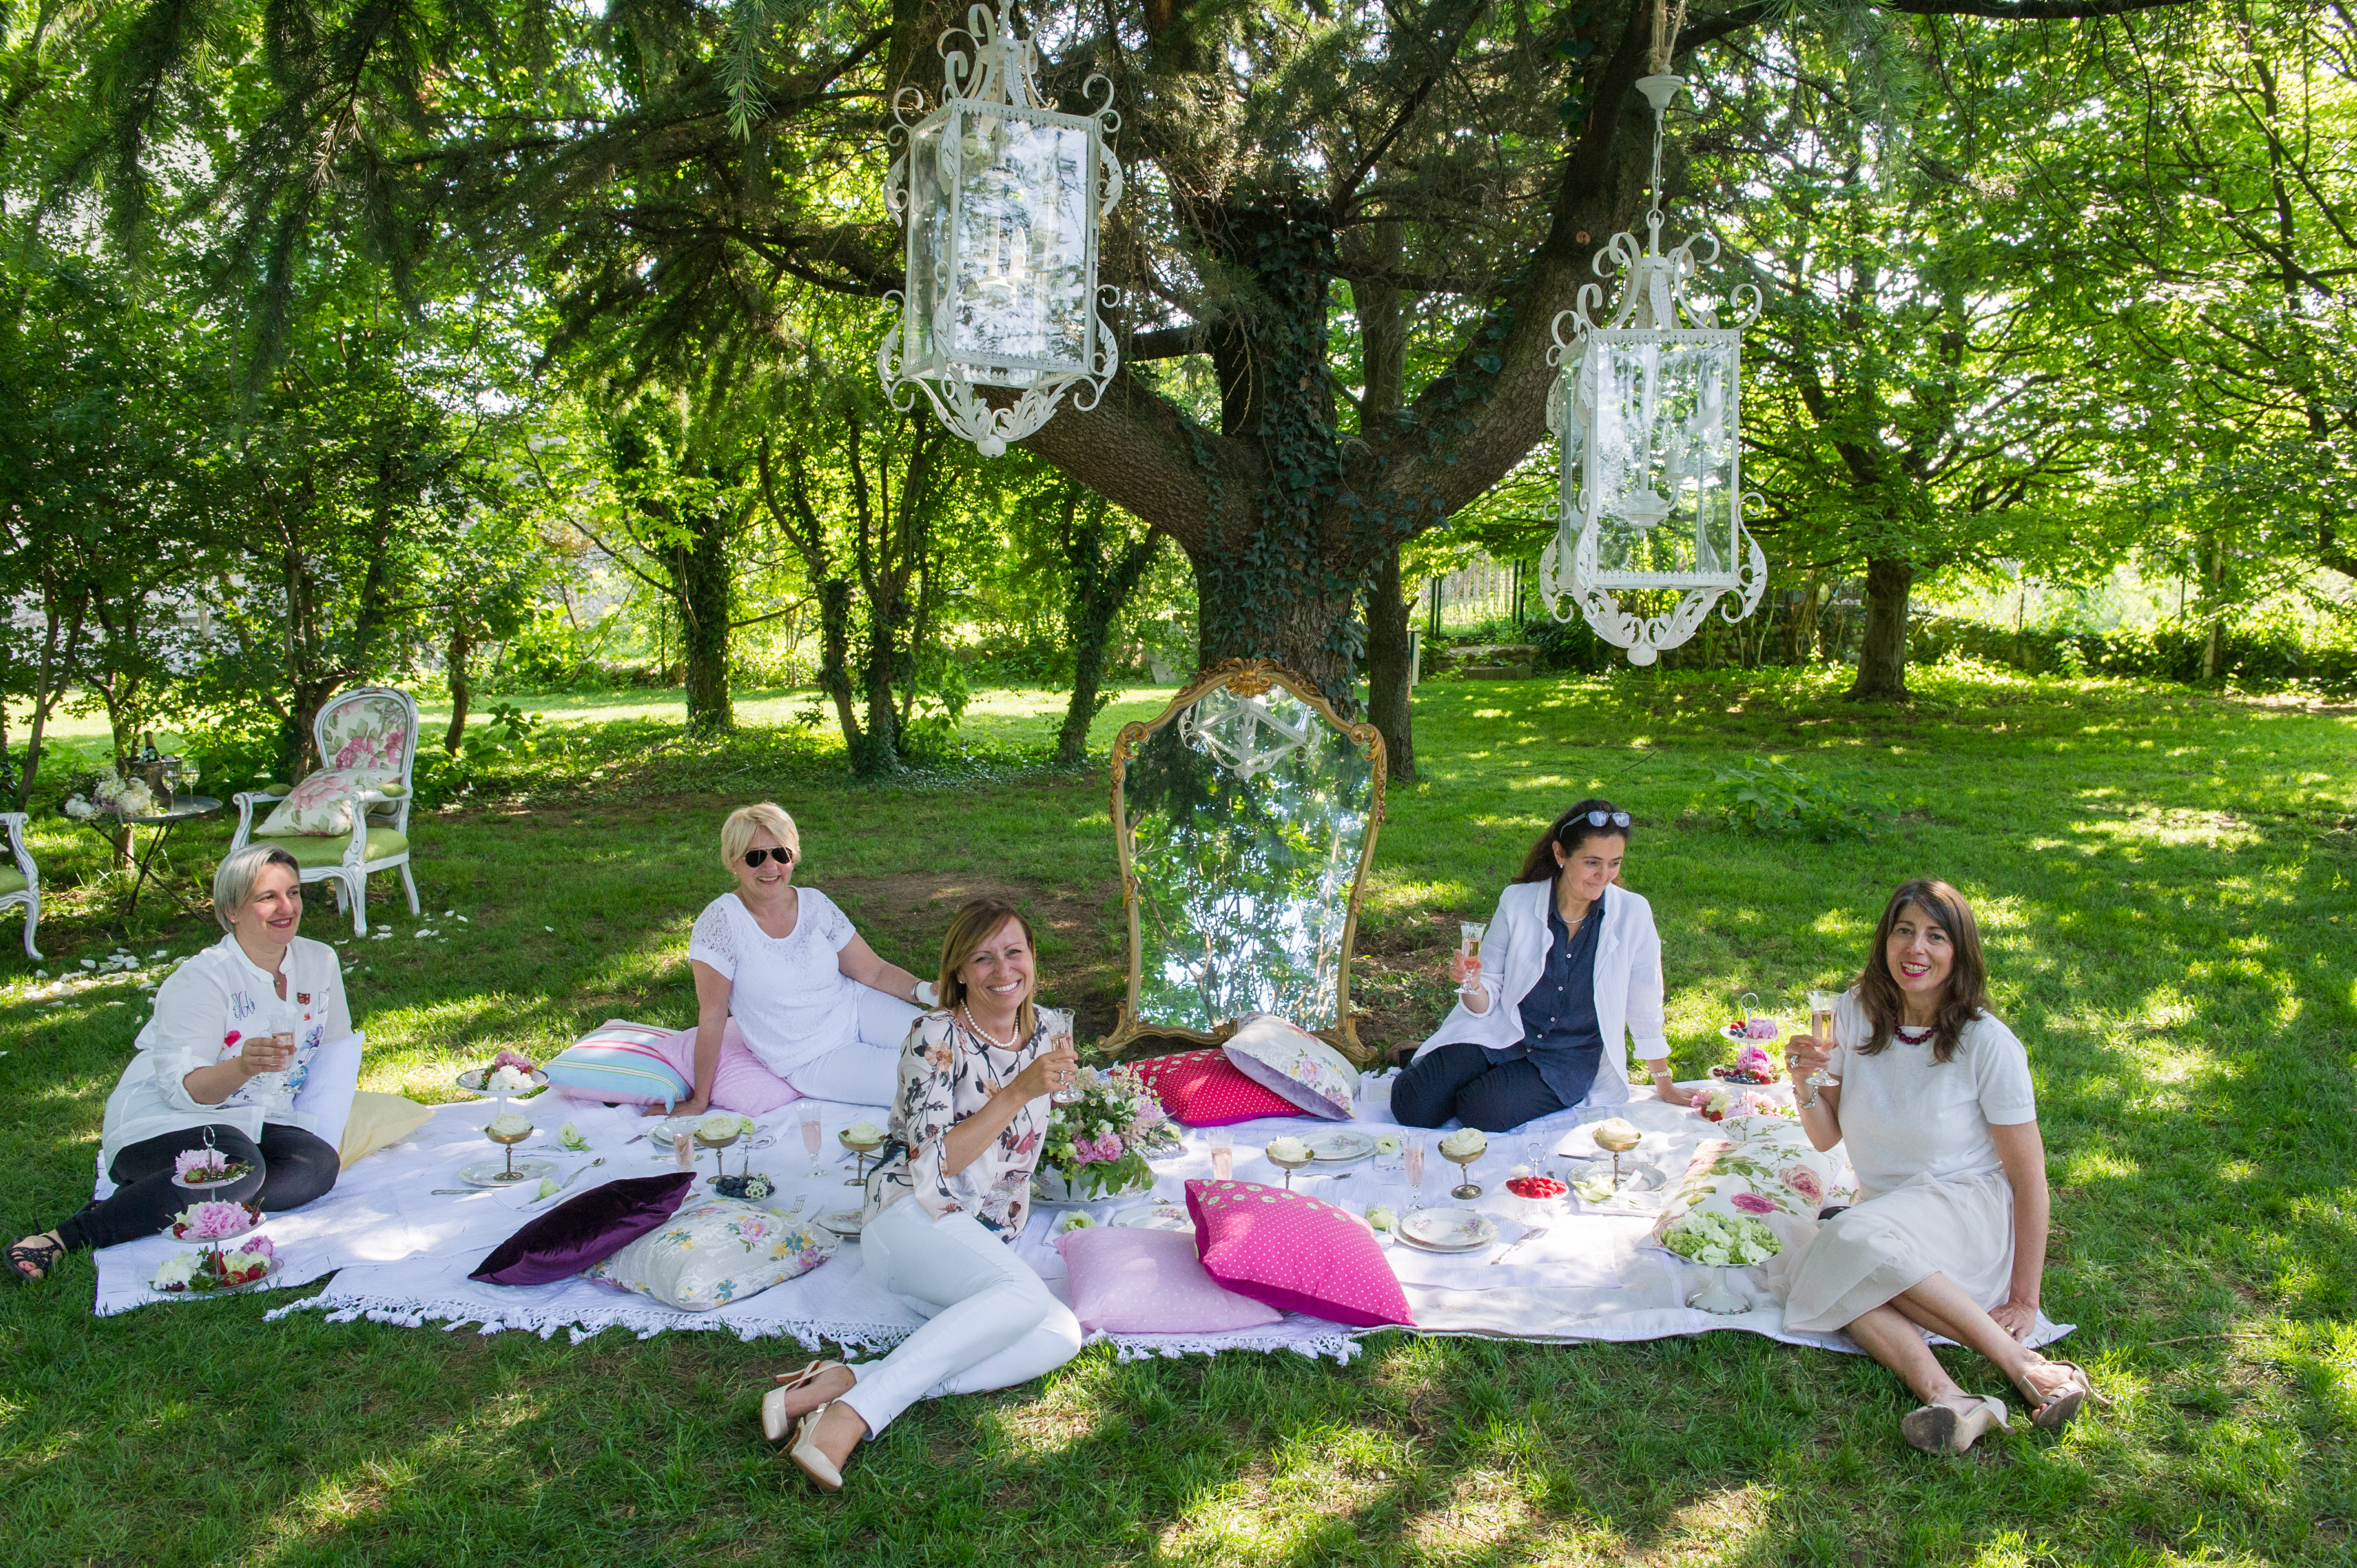 YOUR ITALIAN COUNTRY CHIC PICNIC WEDDING